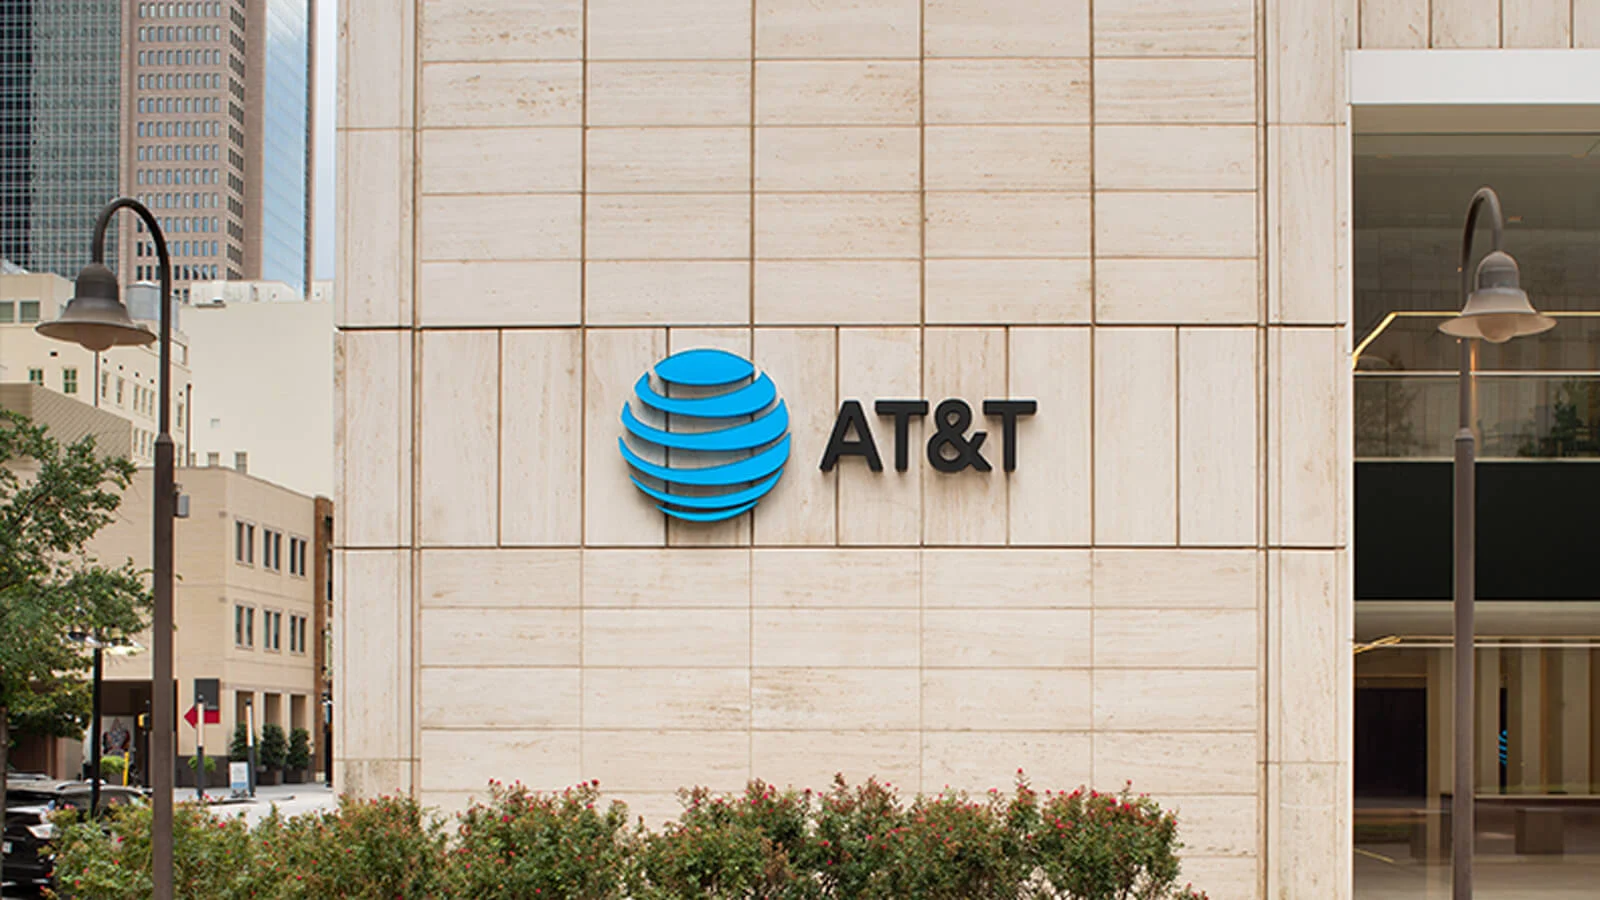 Is Your Info Safe? Unpacking the Mystery Behind AT&T's Alleged 70 Million User Data Leak